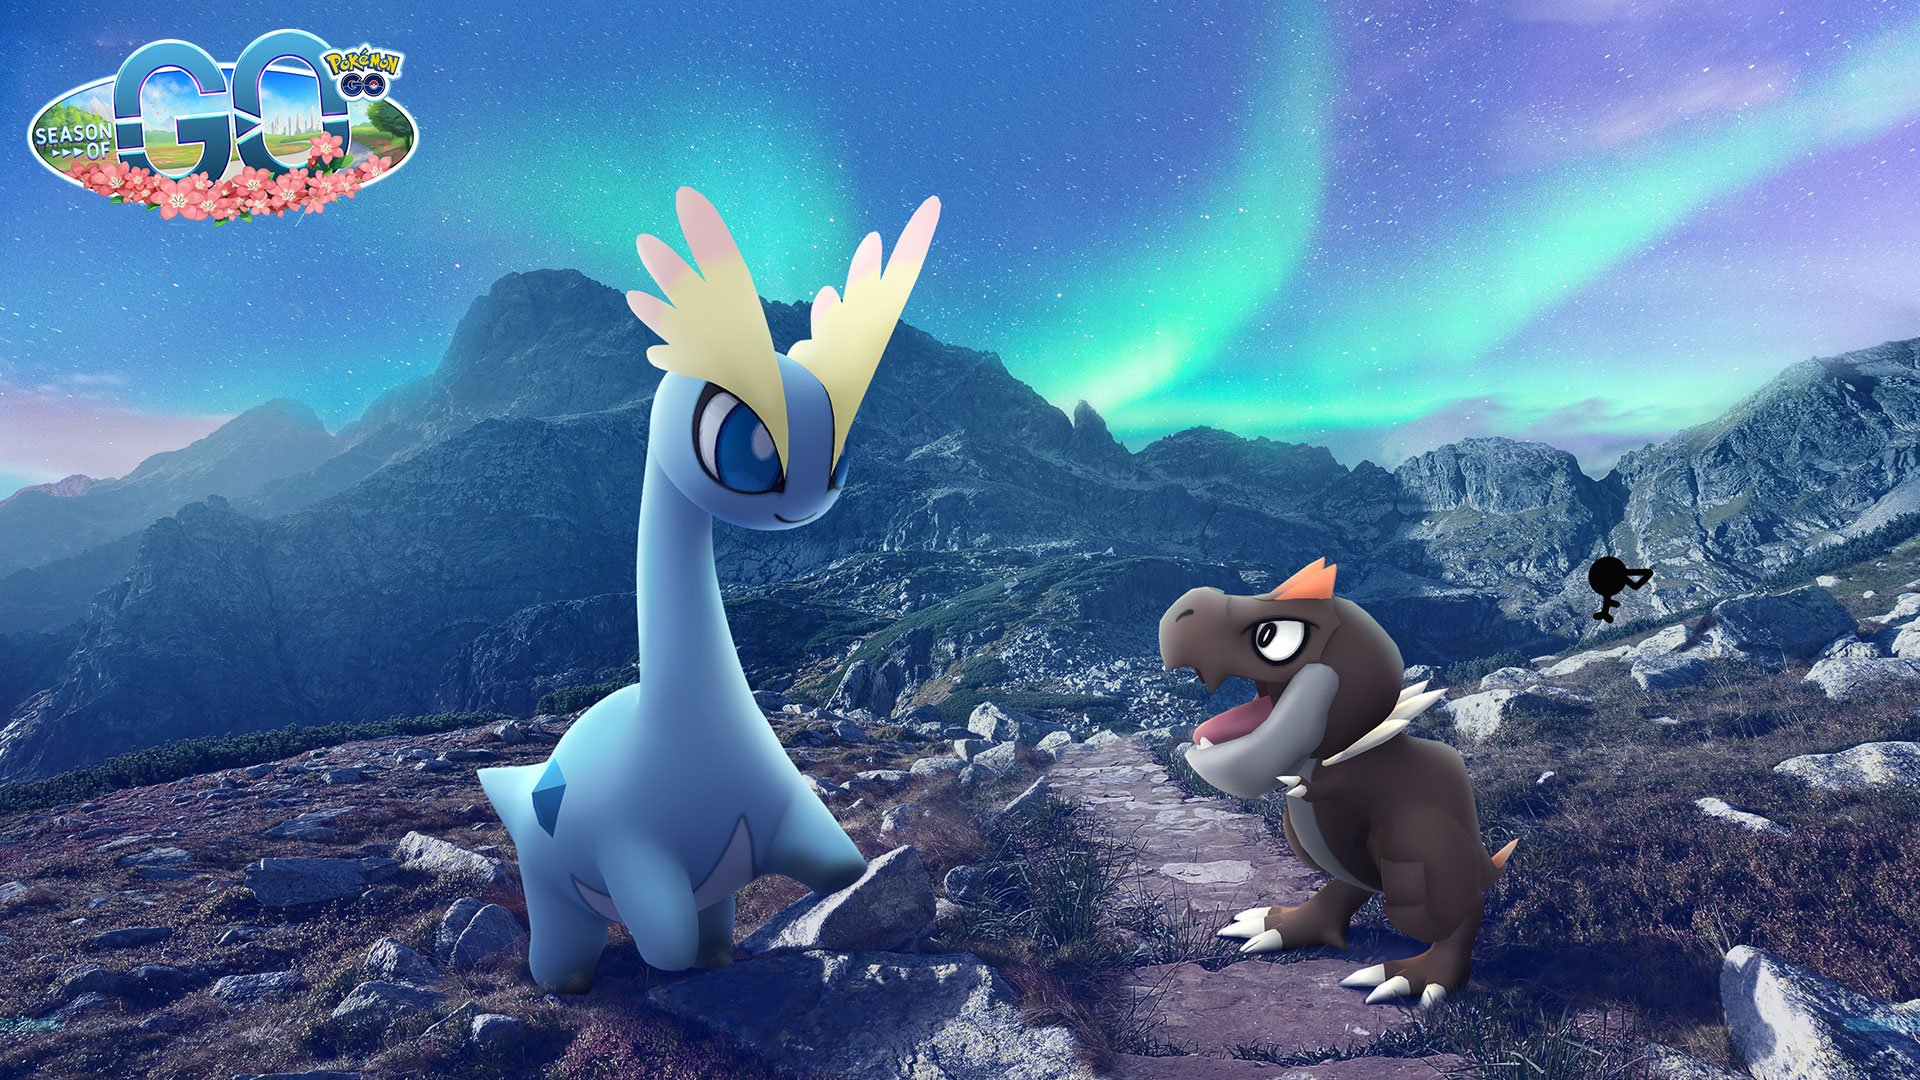 Players Report that Onix will be the Star of the First Pokemon